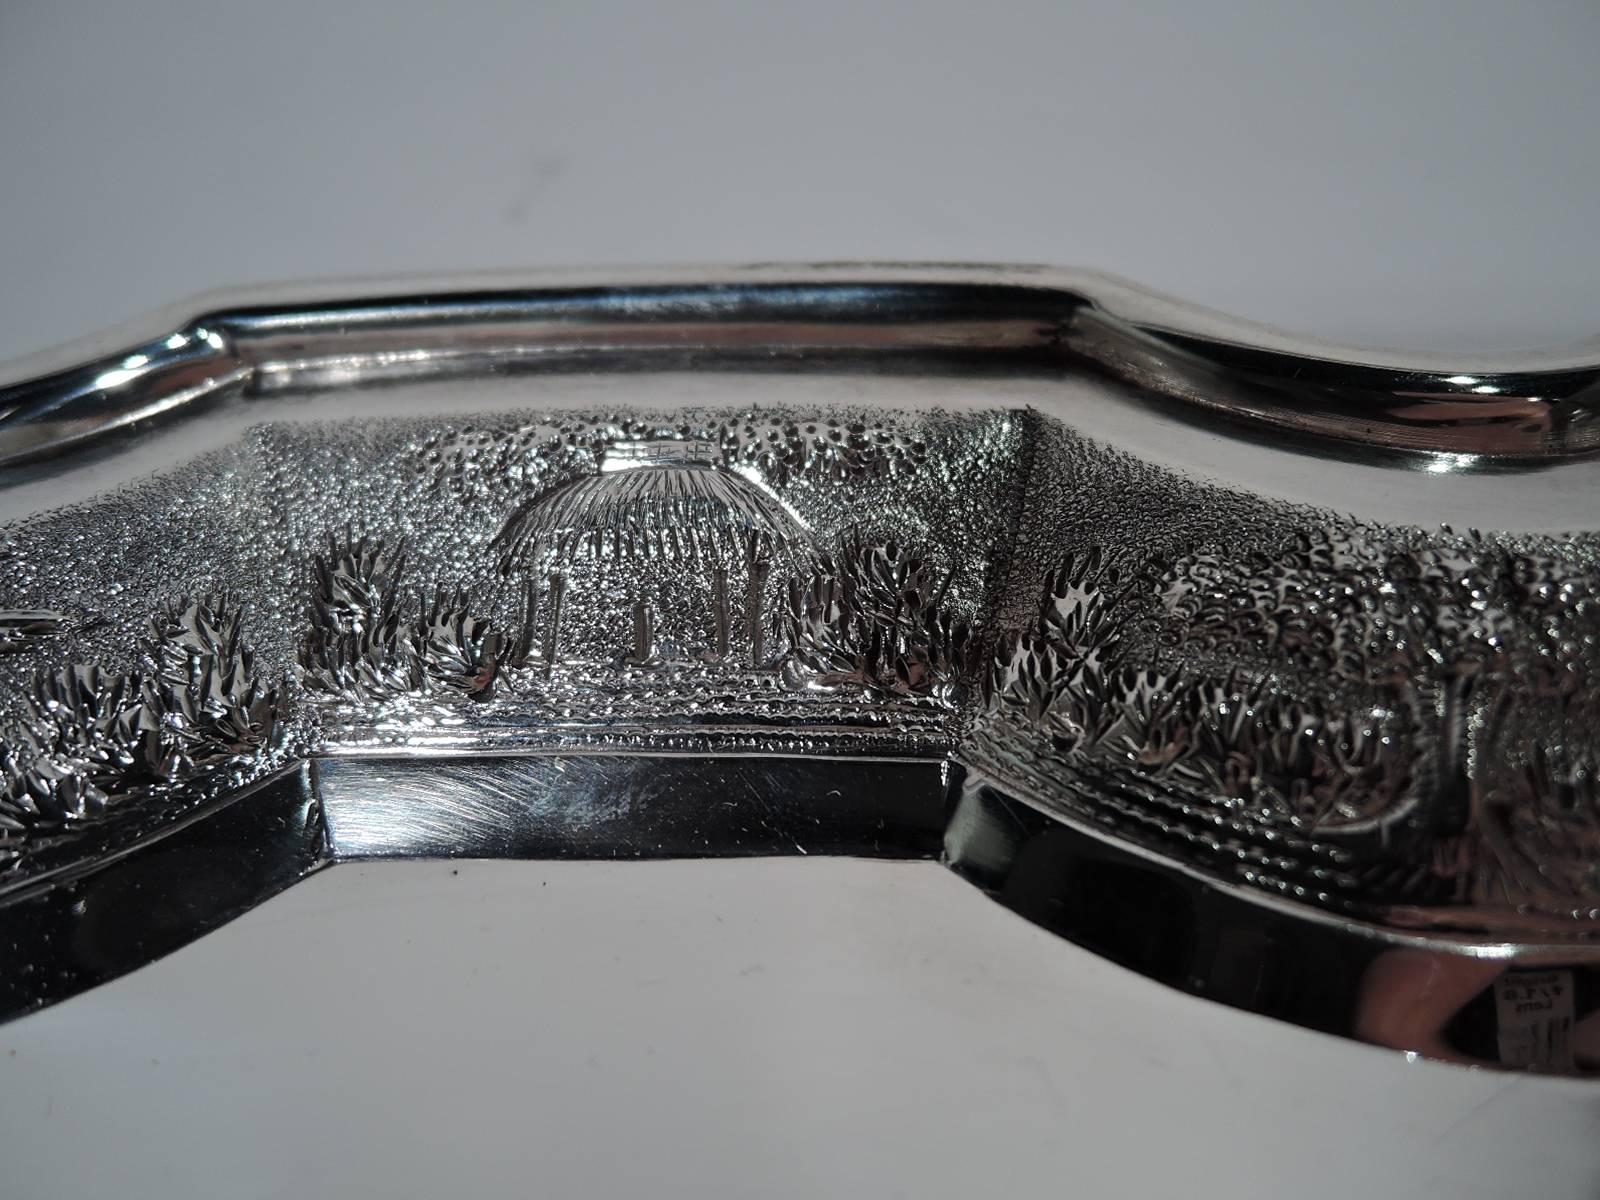 Chinese Export Antique Indo-Chinese Silver Tray with Exotic Ornament